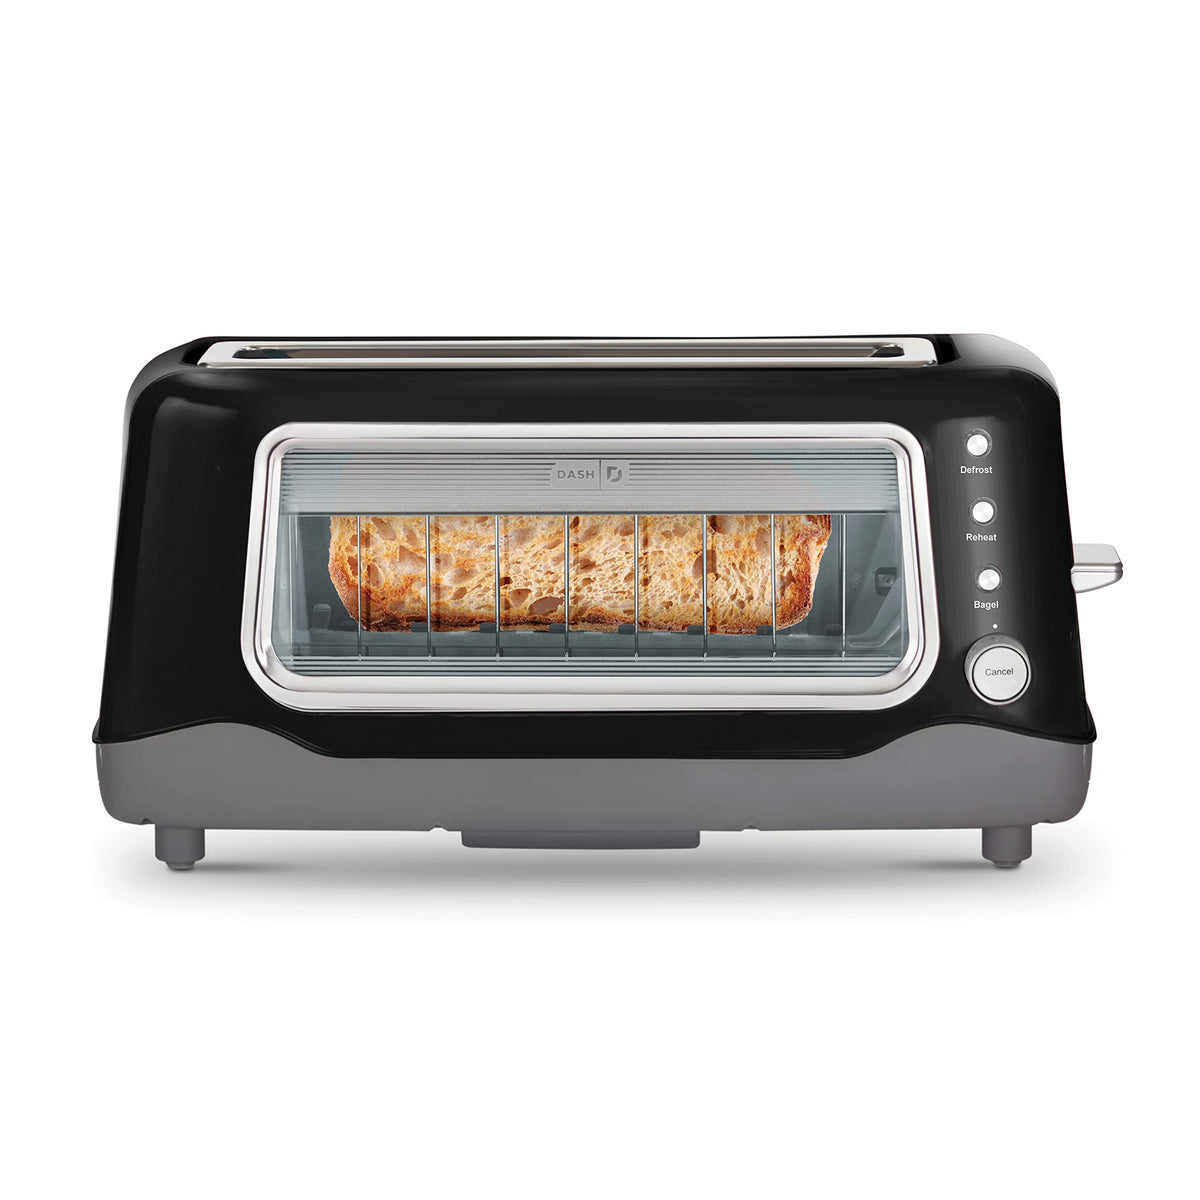 Dash Bread toaster 2 Slice with Extra Wide Slot | No.1 in USA 1100W Pop up toaster 2 slices Automatic | 7 Browning Levels with Defrost & Reheat | Removable Crumb Tray | Black